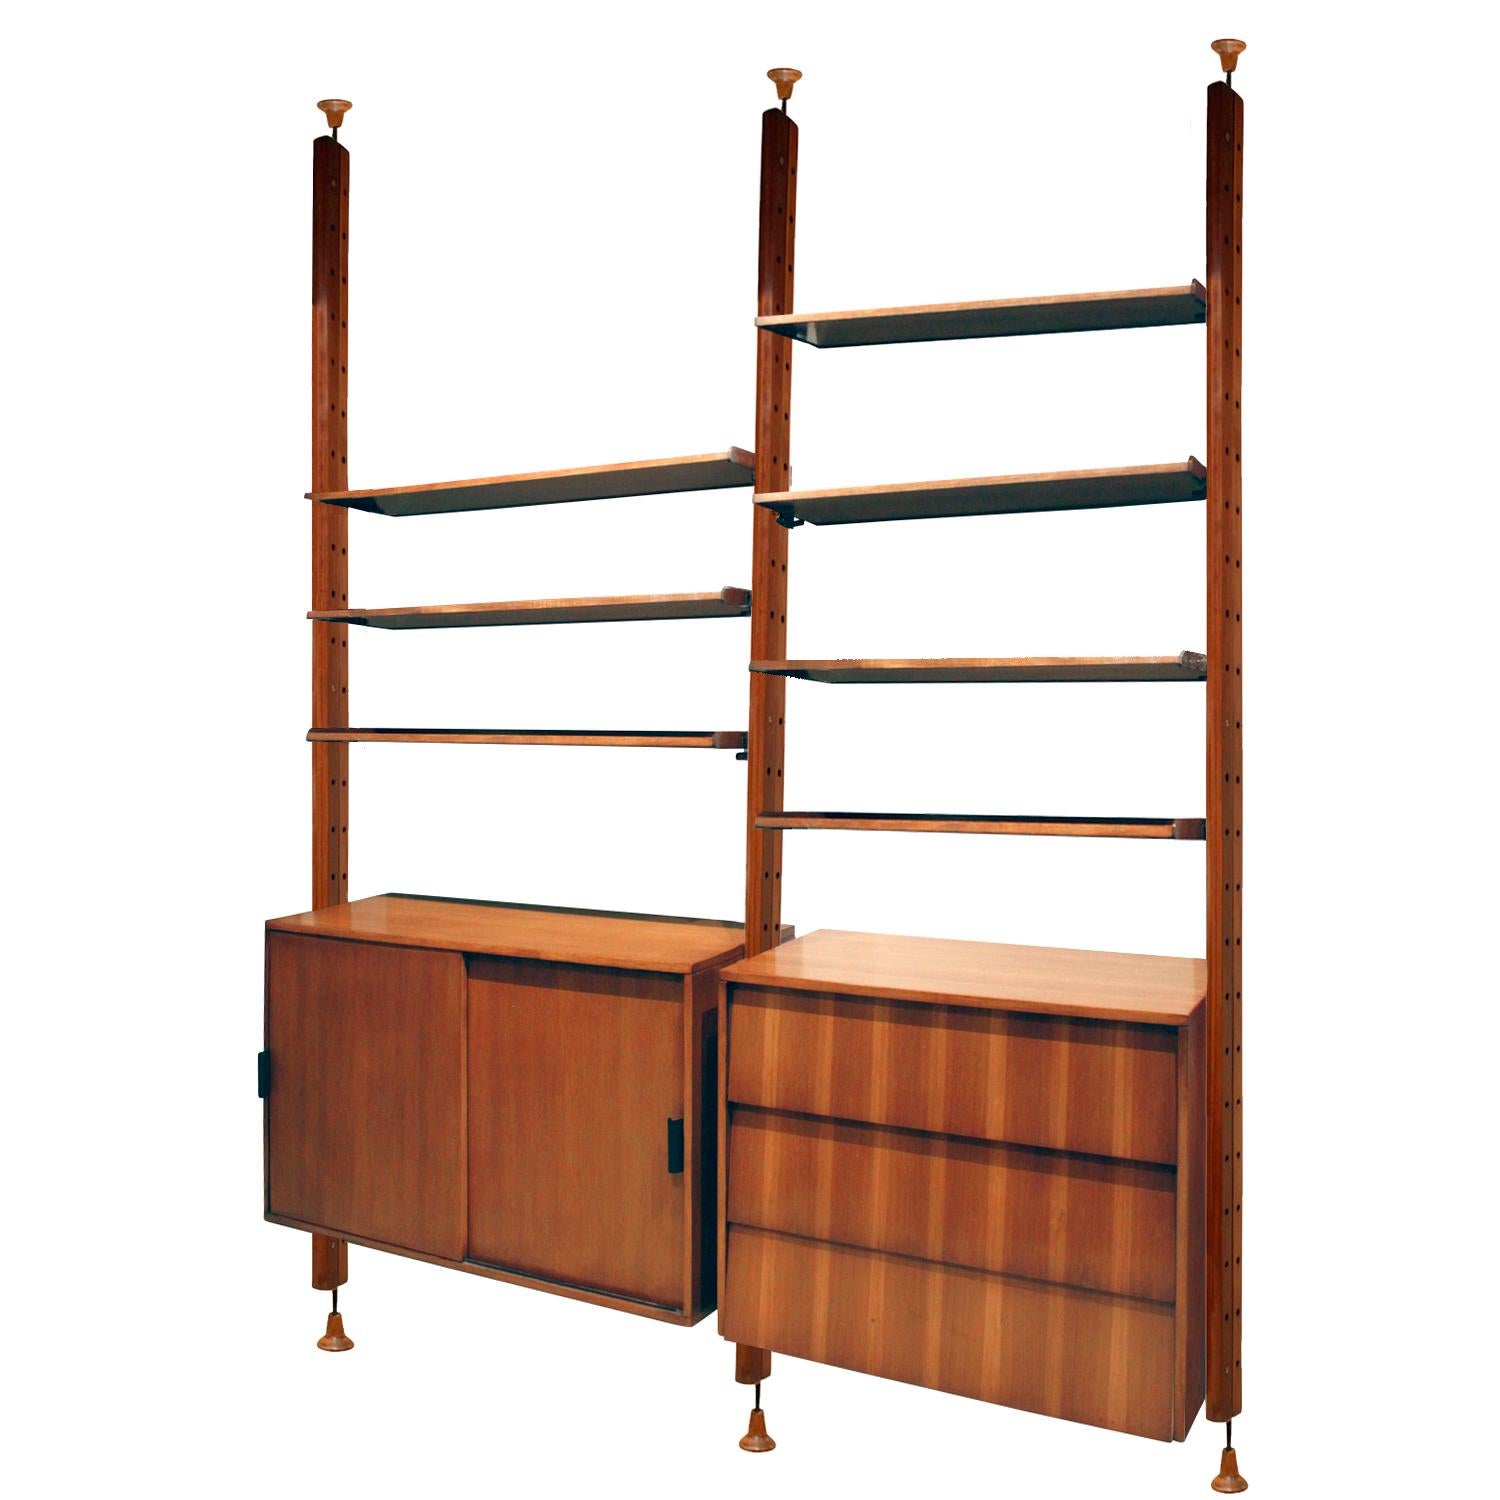 Wall unit with adjustable shelving system, cabinet, chest and flip top desk in rosewood, teak and mahogany by I.S.A., Italian 1964 (label on desk that reads, “ISA Bergamo Italy”). This wall unit is very versatile and beautifully made.